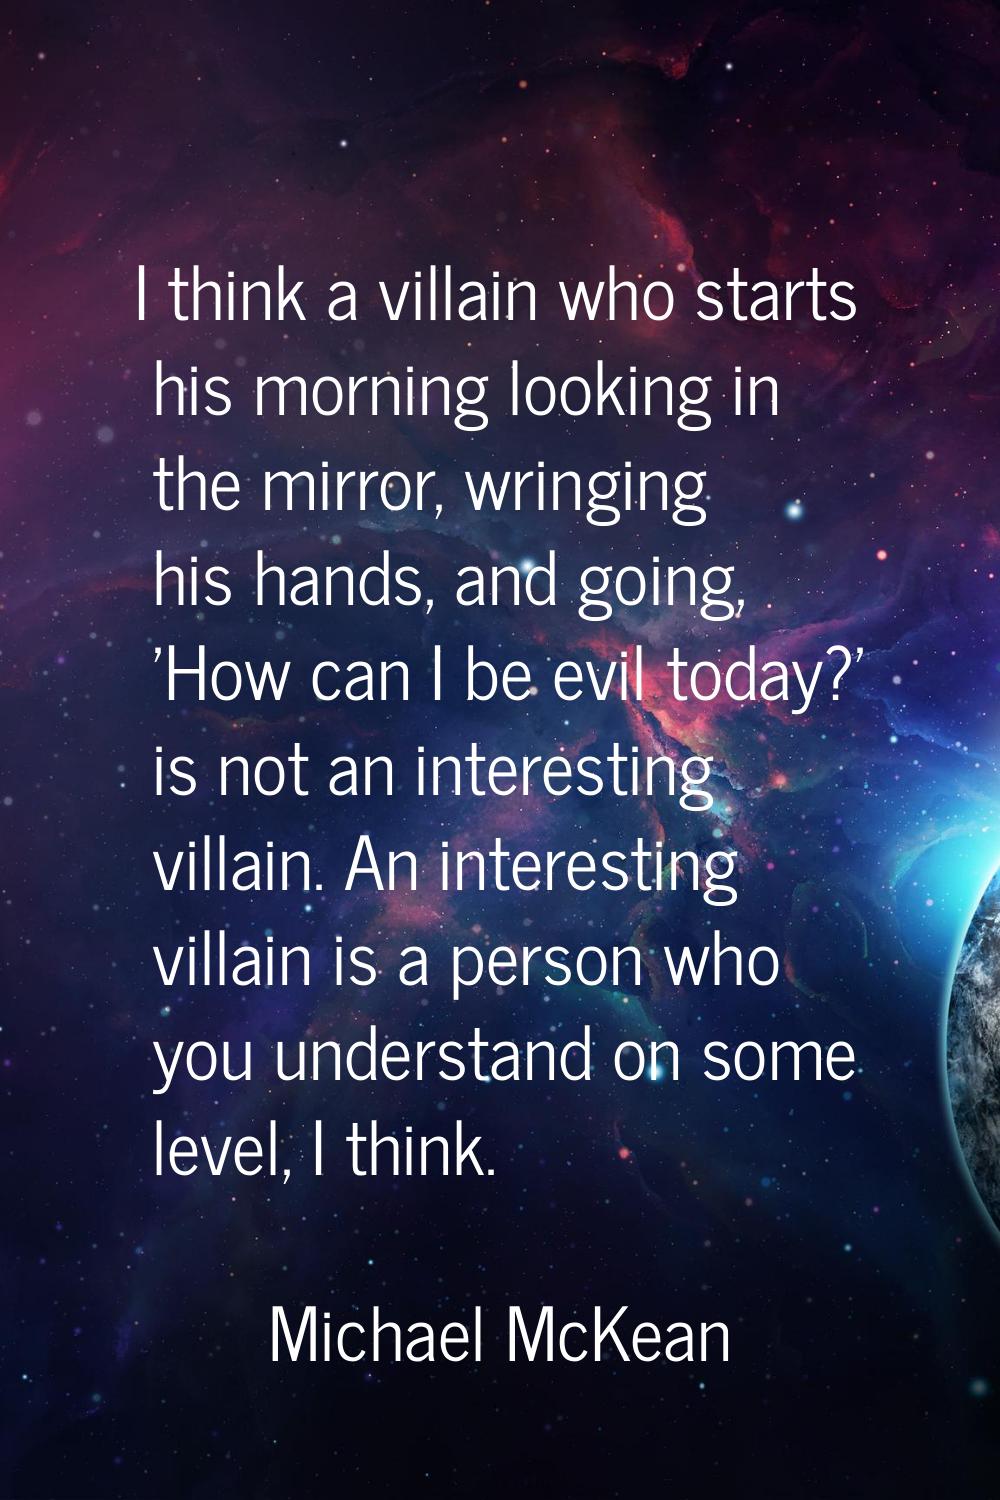 I think a villain who starts his morning looking in the mirror, wringing his hands, and going, 'How